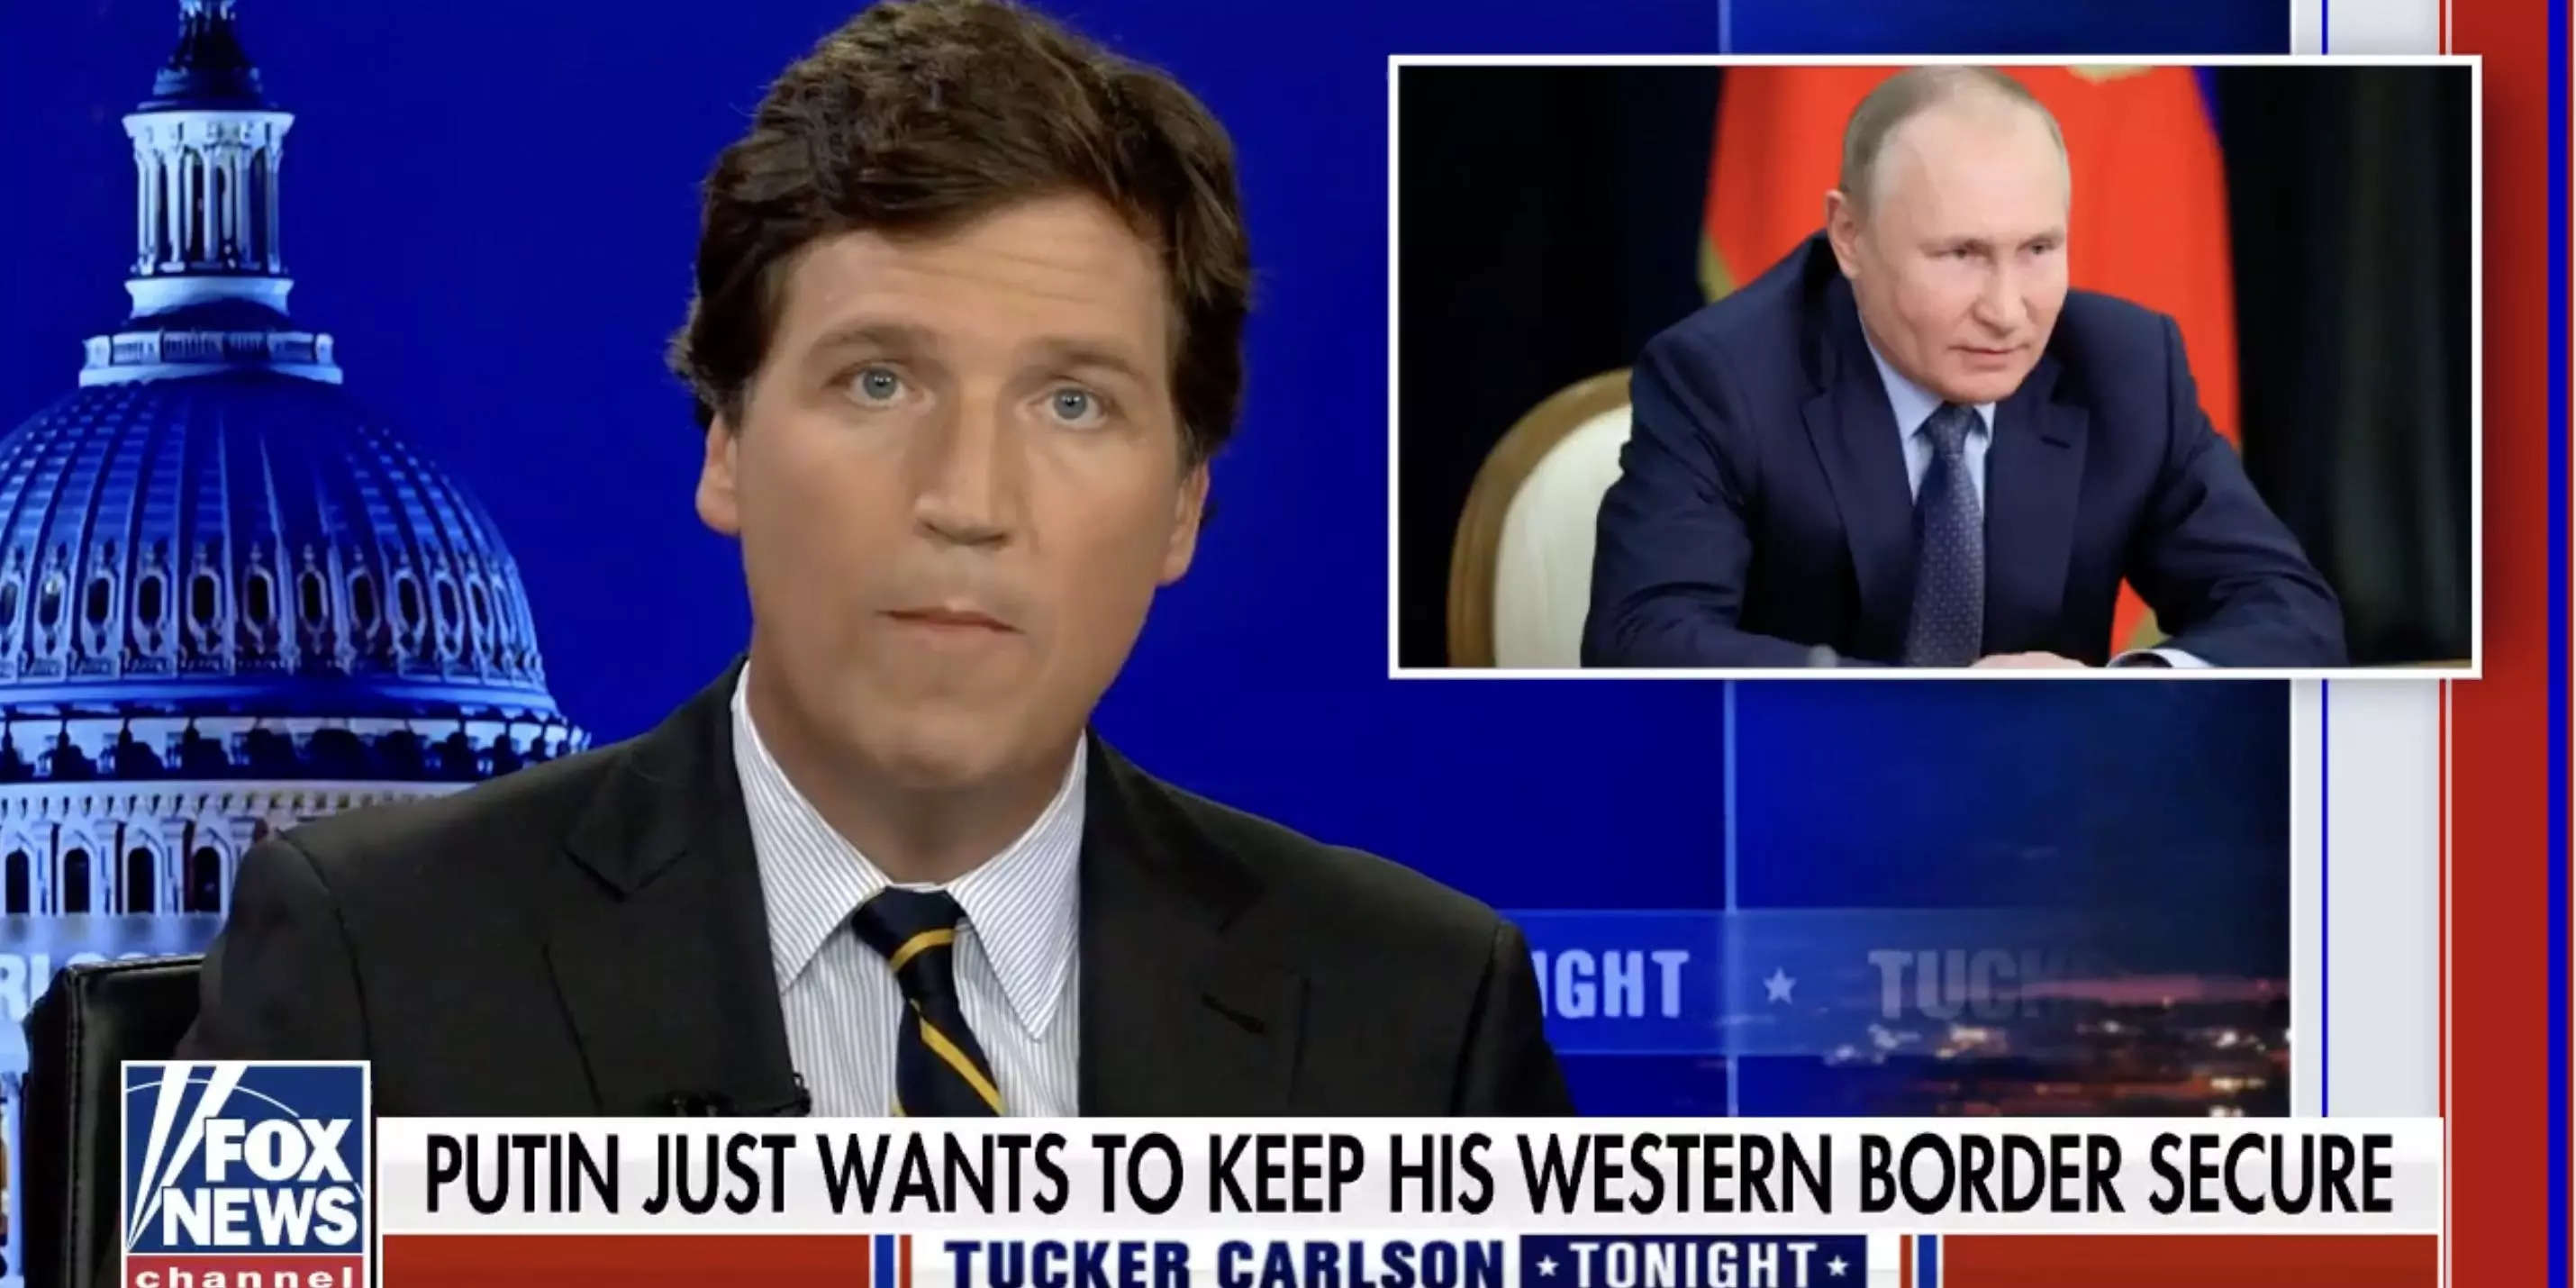 Tucker Carlson told The New York Times he's not a Russian agent amid  controversy over his pro-Kremlin stance